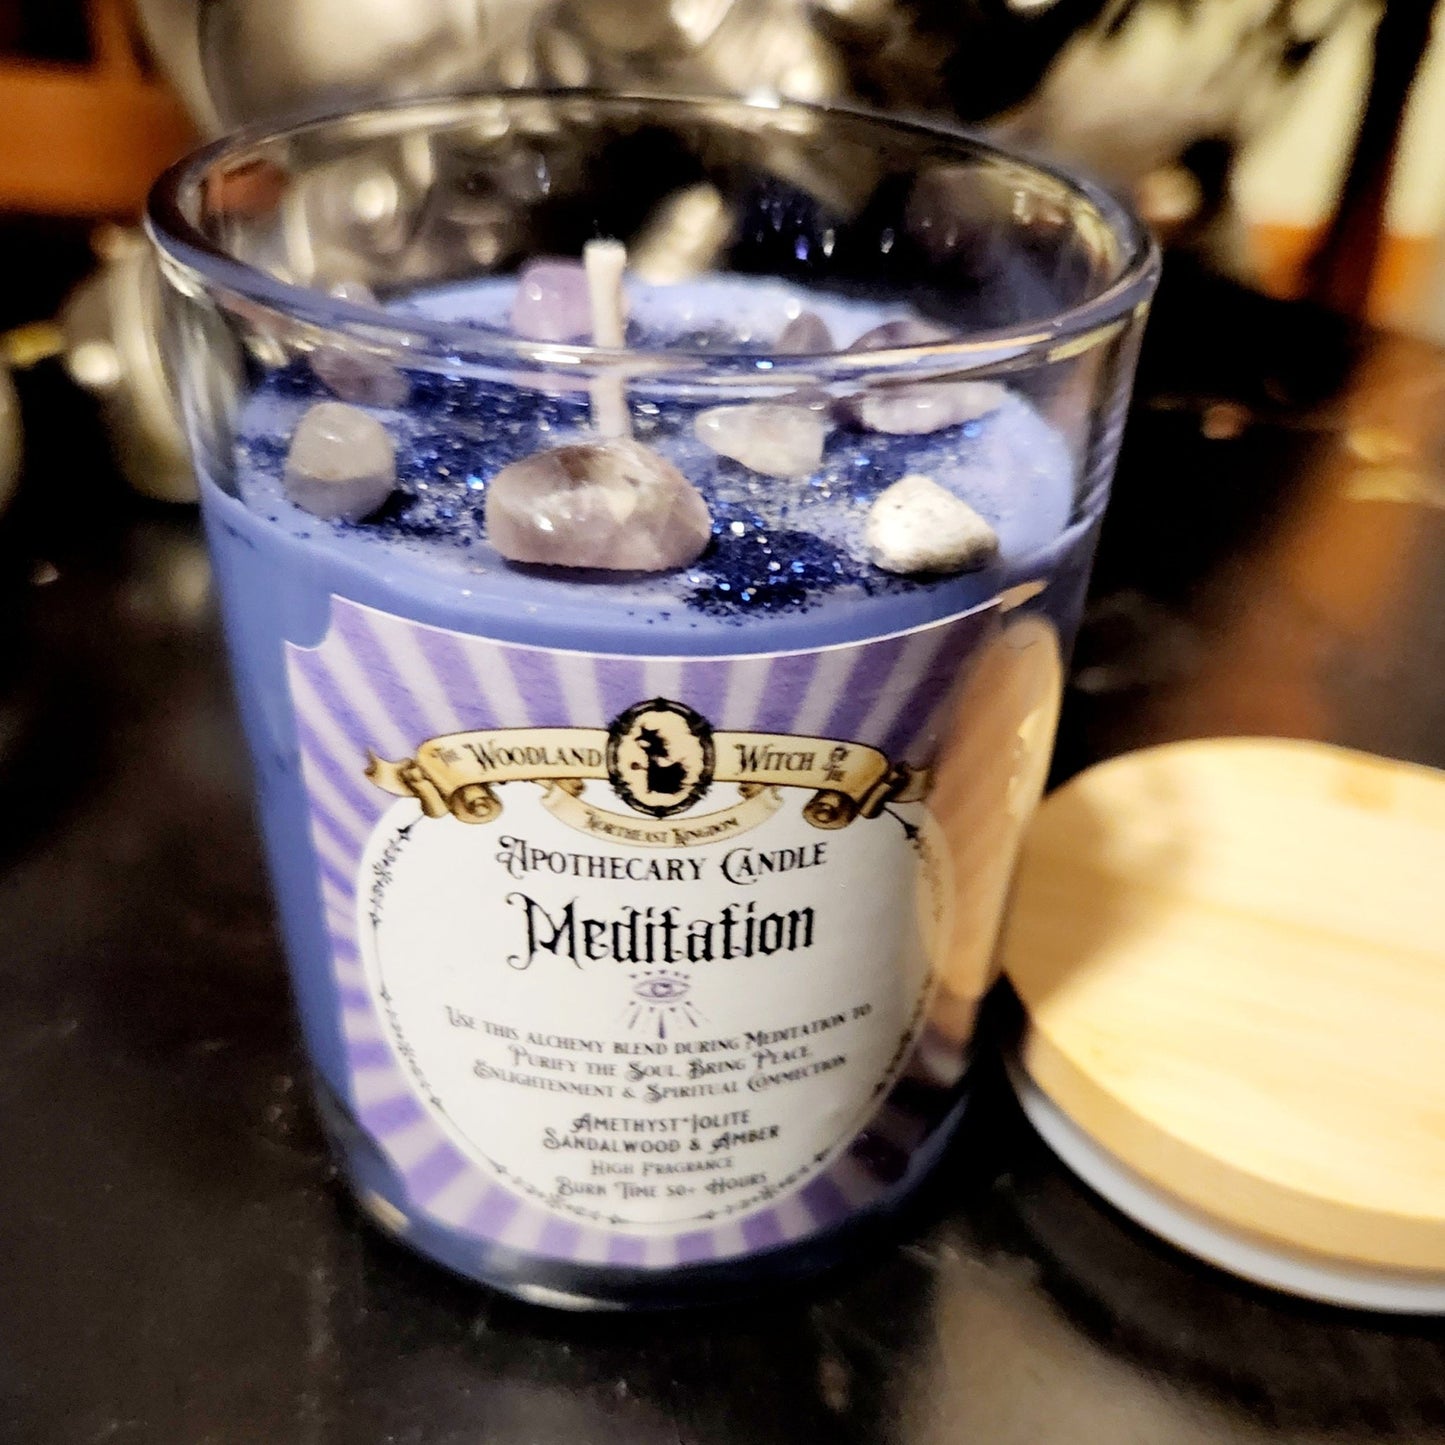 MEDITATION APOTHECARY CANDLE Woodland Witchcraft